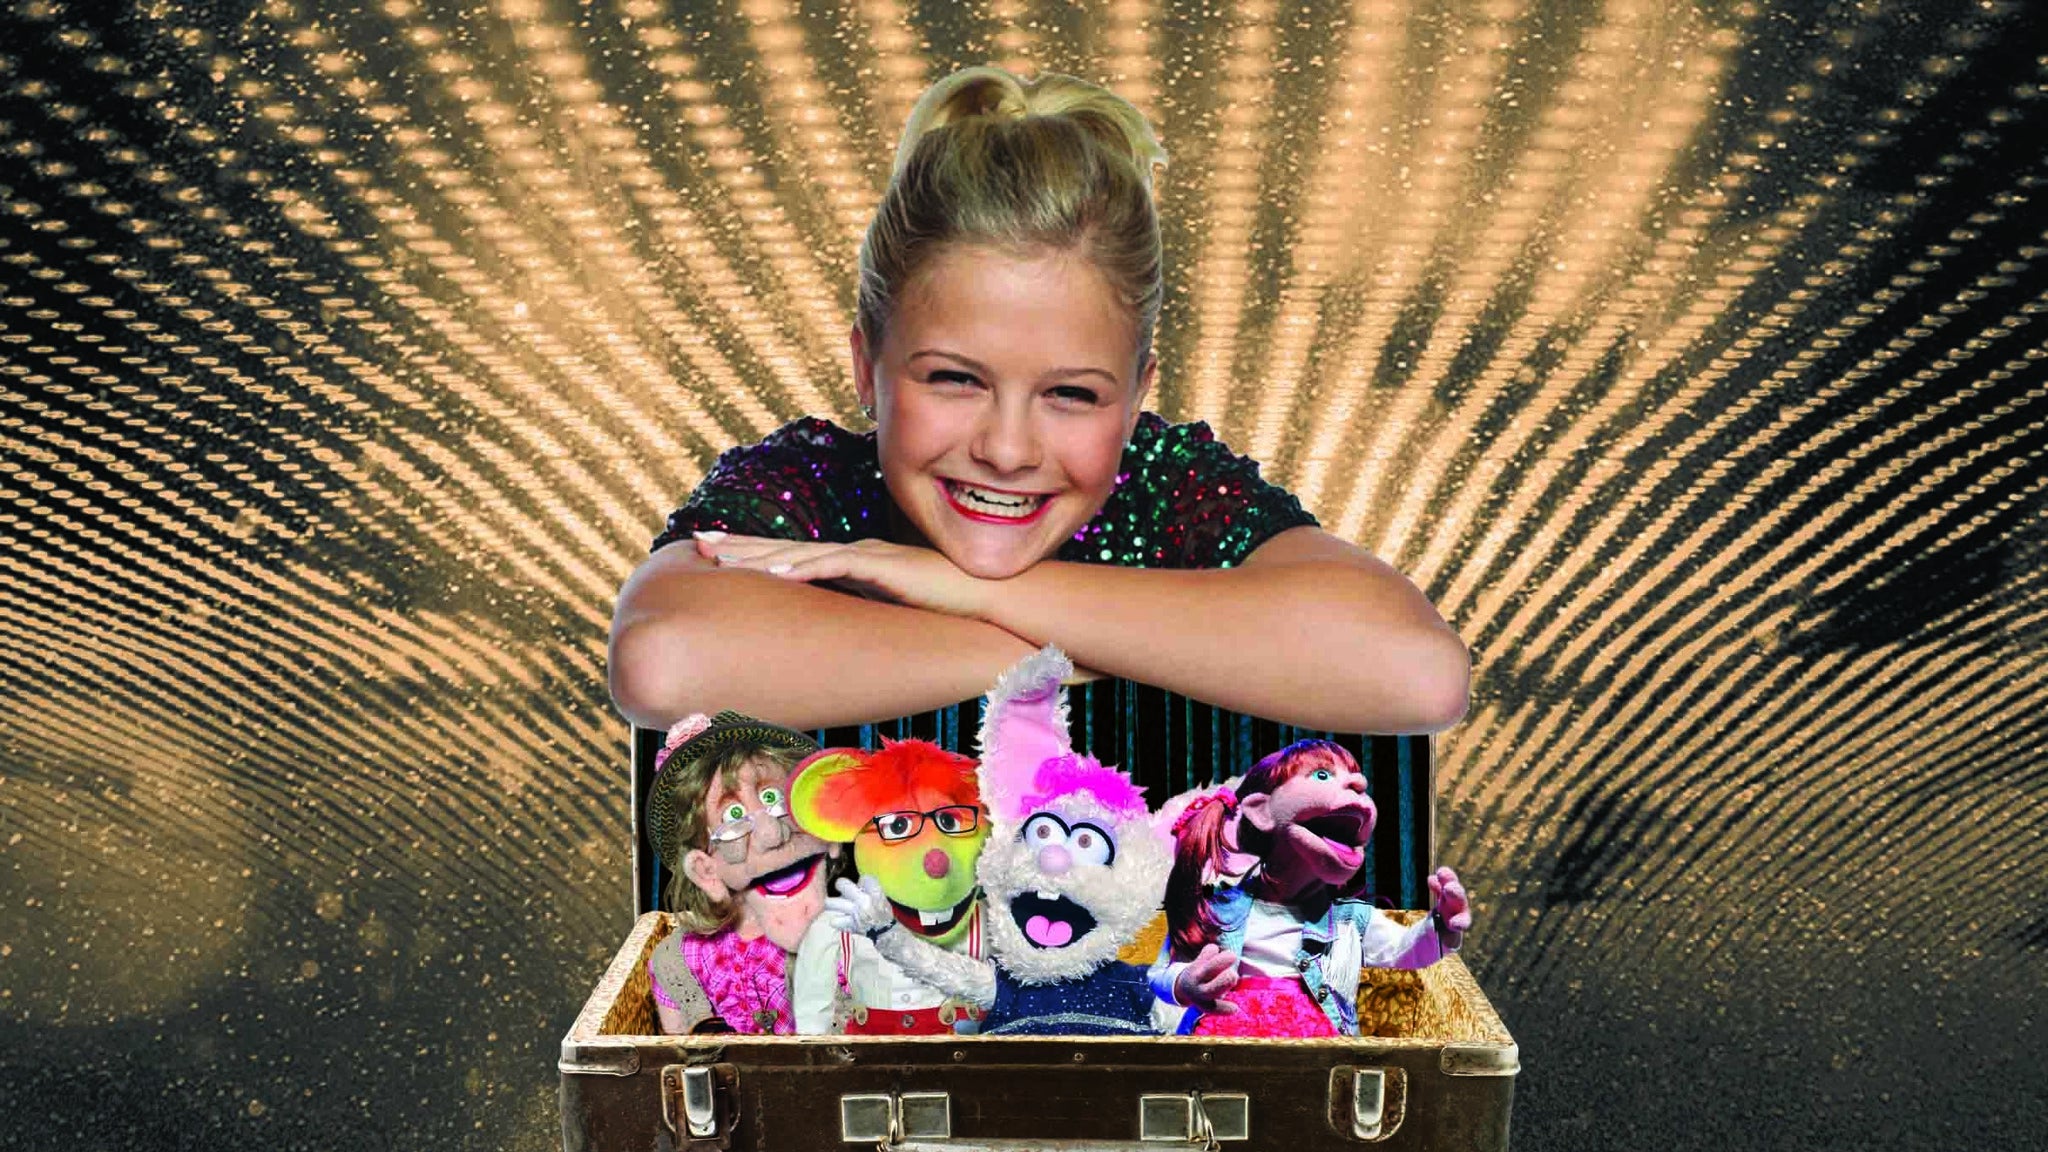 Darci Lynne: My Lips Are Sealed (Except When They're Not) in Reno promo photo for Infinity Rewards presale offer code